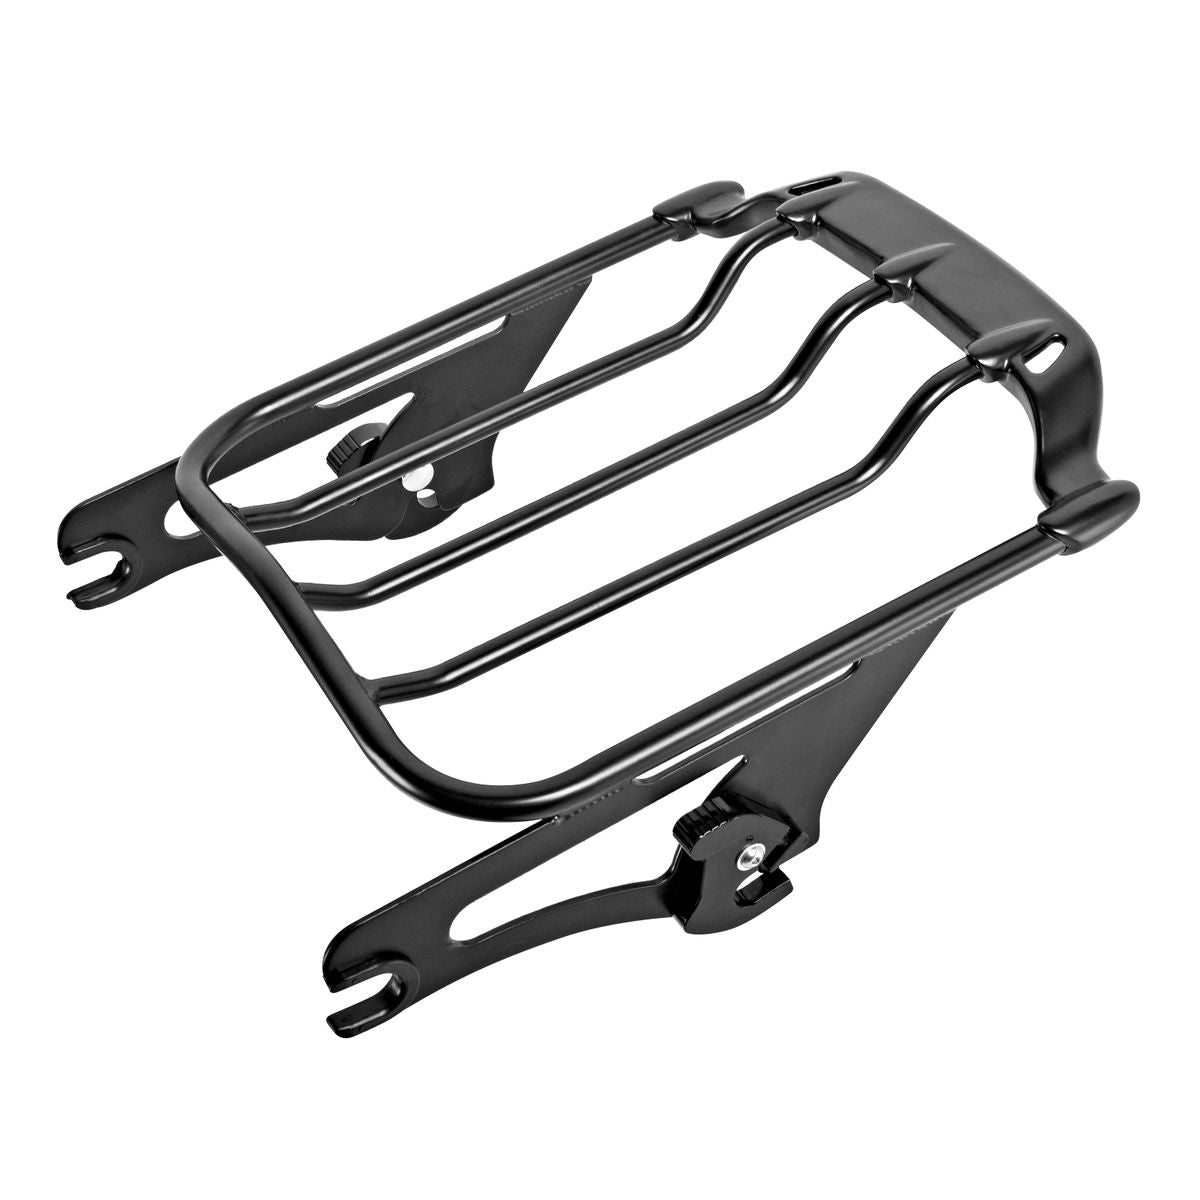 09-'23 Harley Touring Air Wing Two Up Luggage Rack